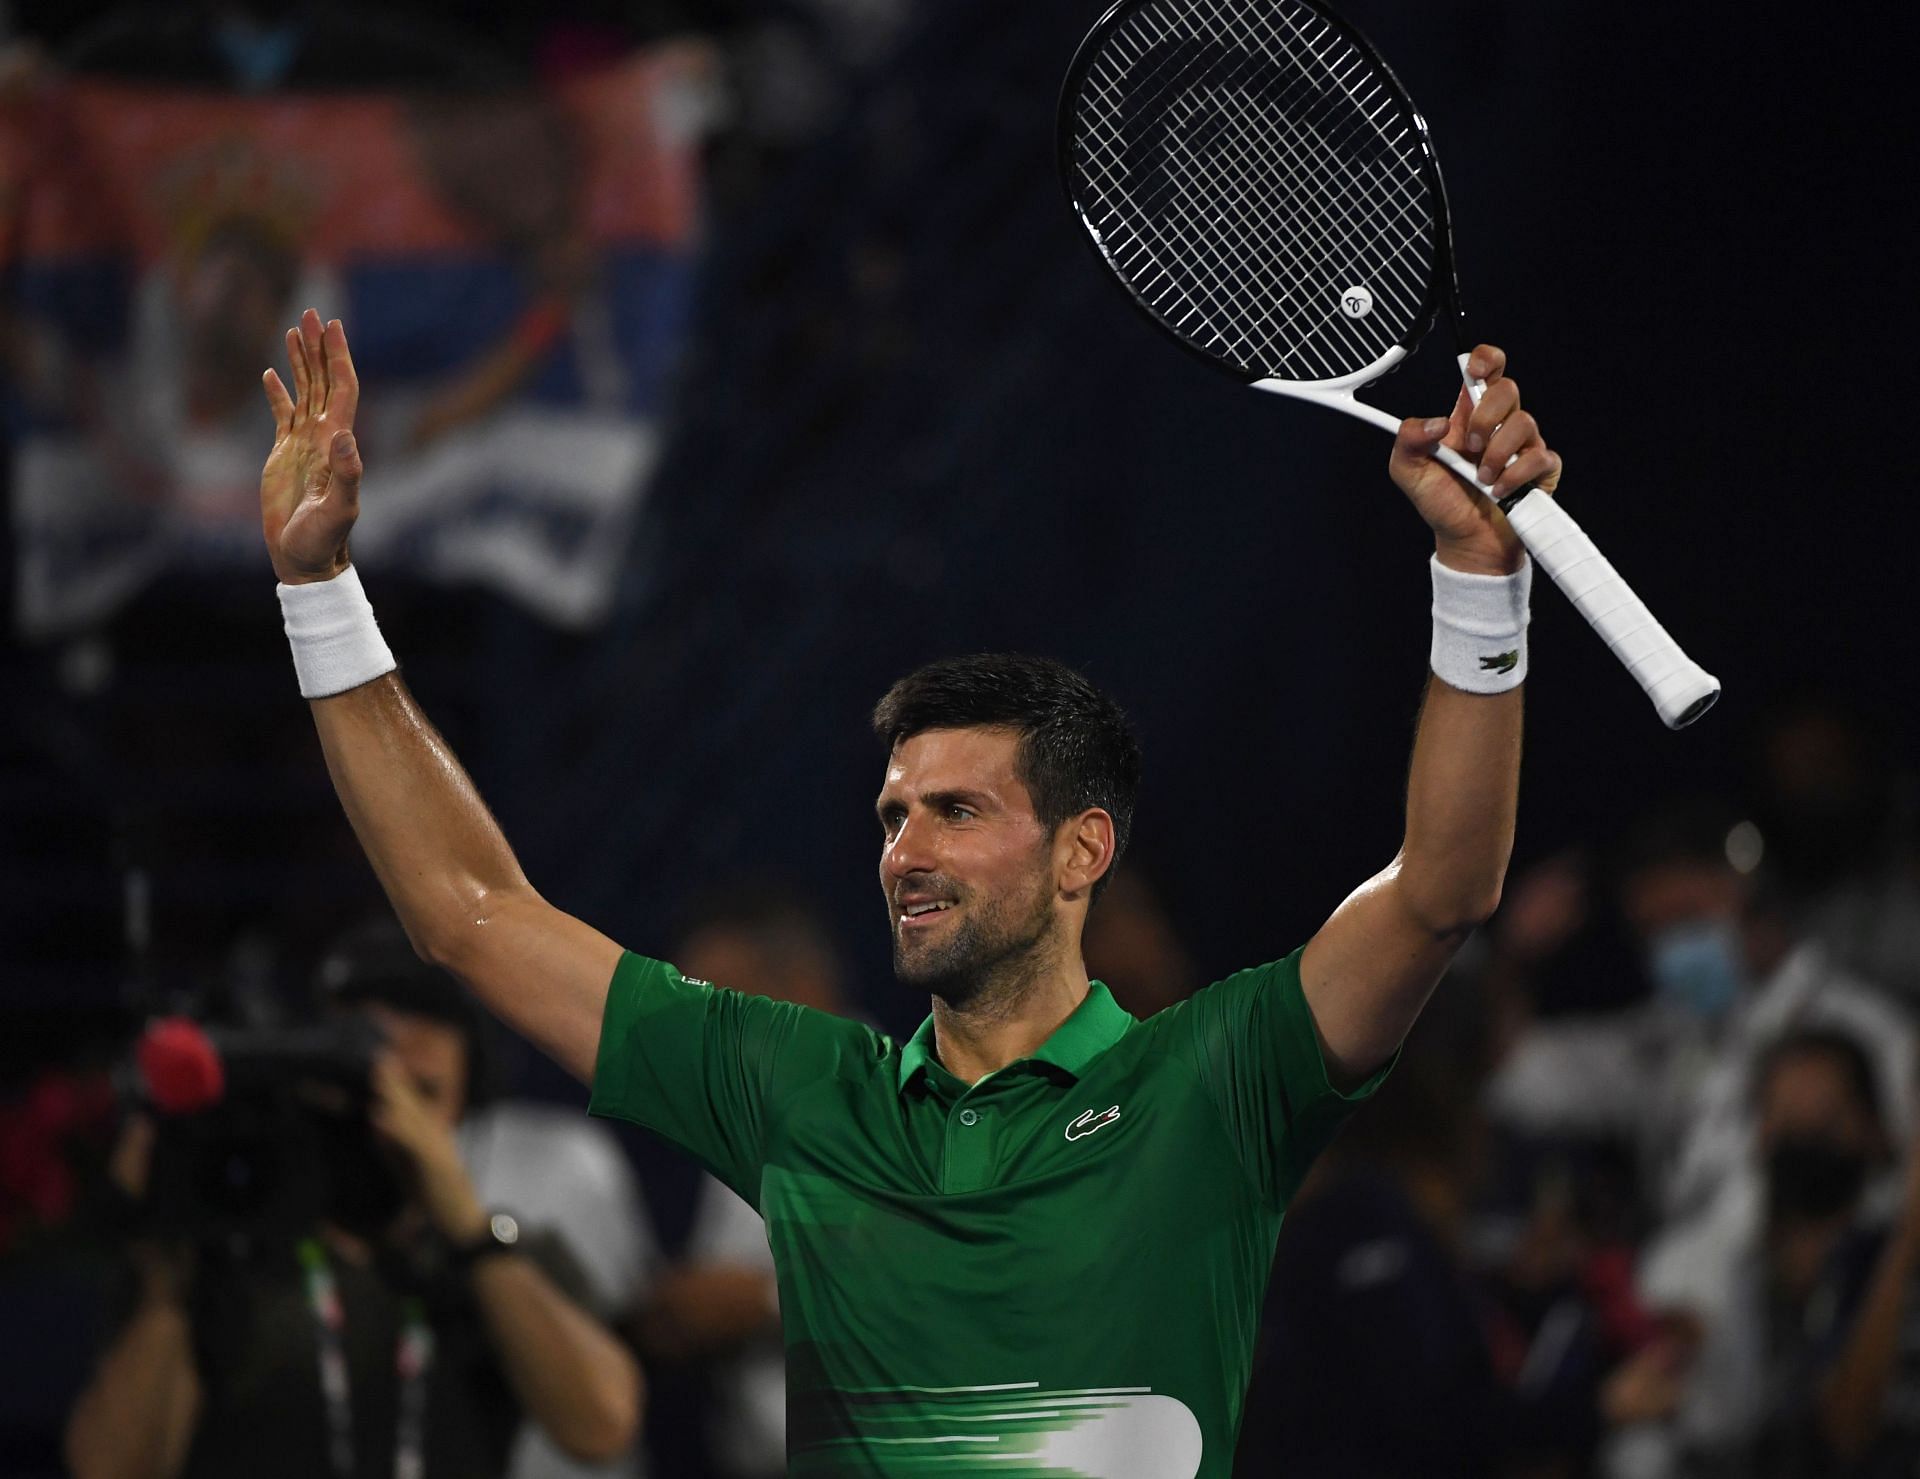 Novak Djokovic will be able to play the 2022 French Open